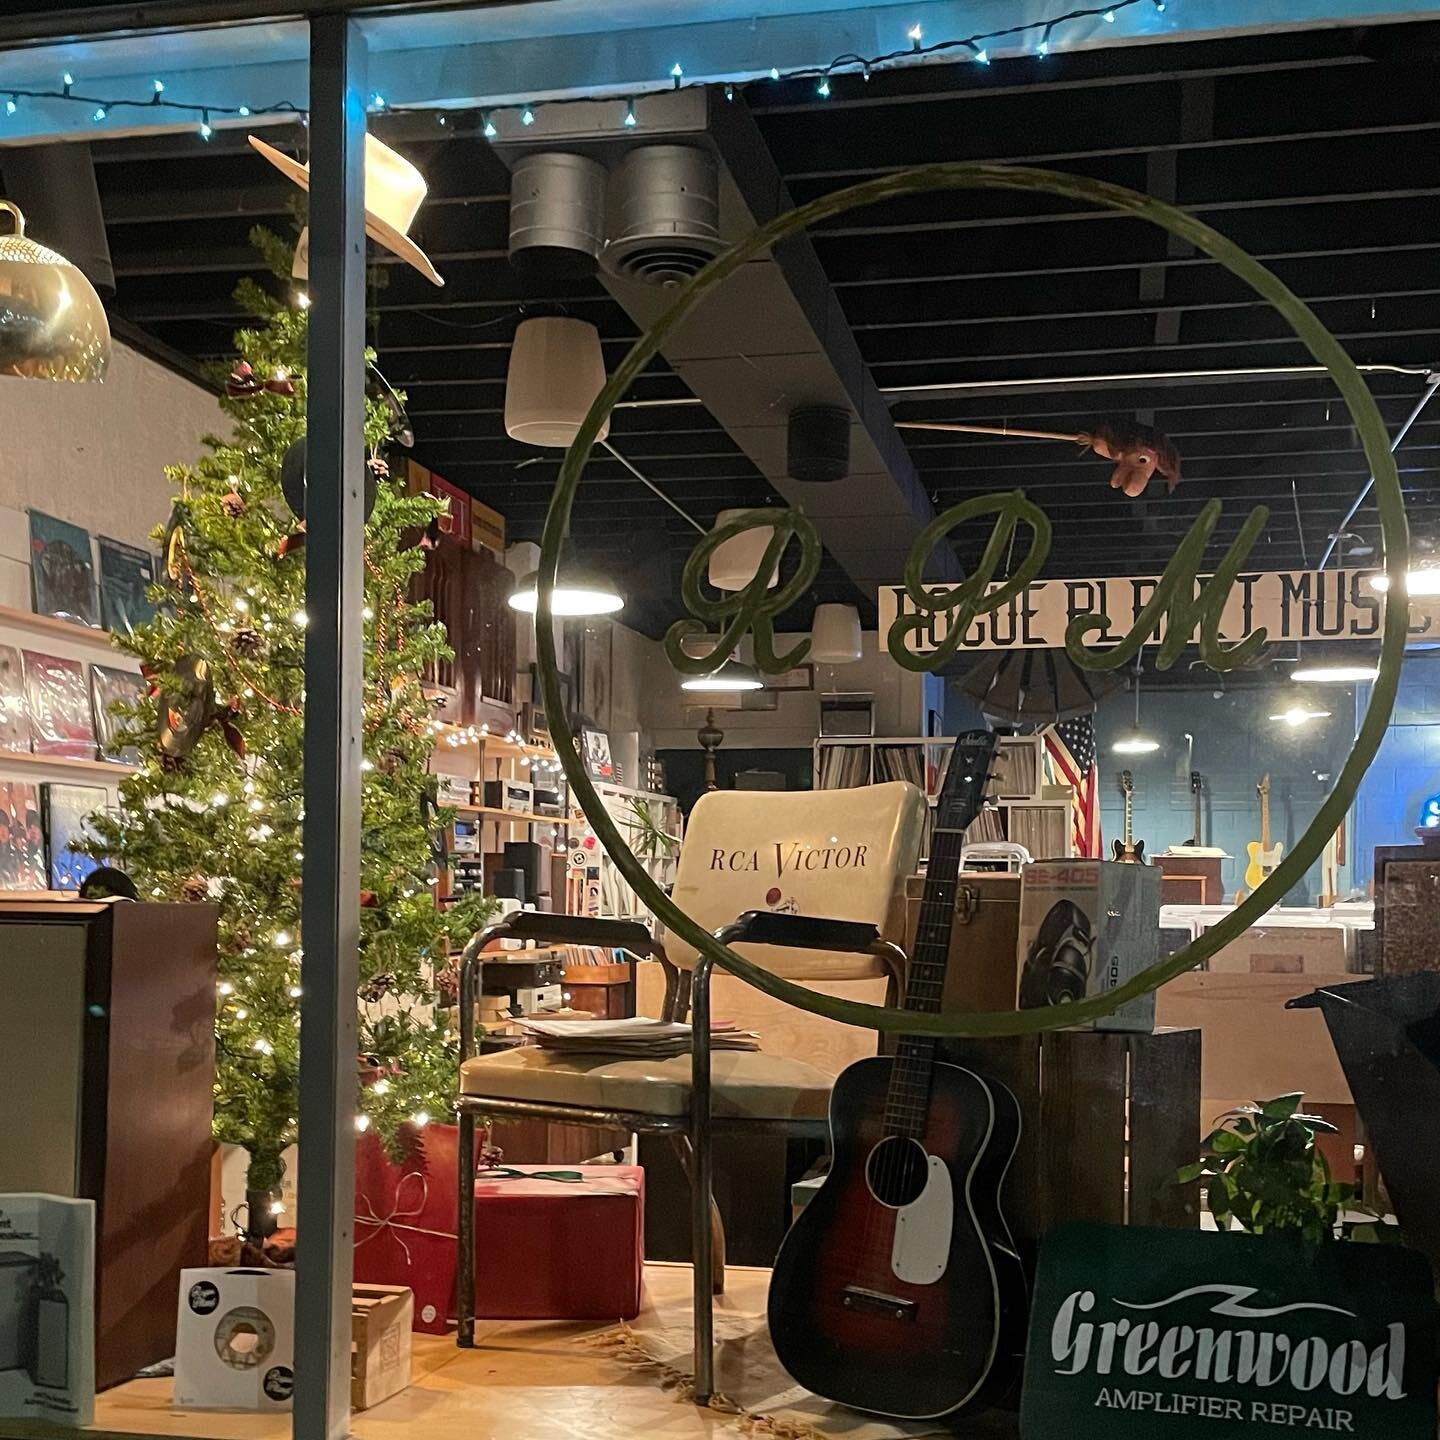 Feeling festive 🎄

We are ready to welcome a deluge of holiday shoppers&hellip; serious we would love to help you find a great record for the folks on your list. 

There is also plenty of time to special order a new vinyl record if needed&mdash; we 